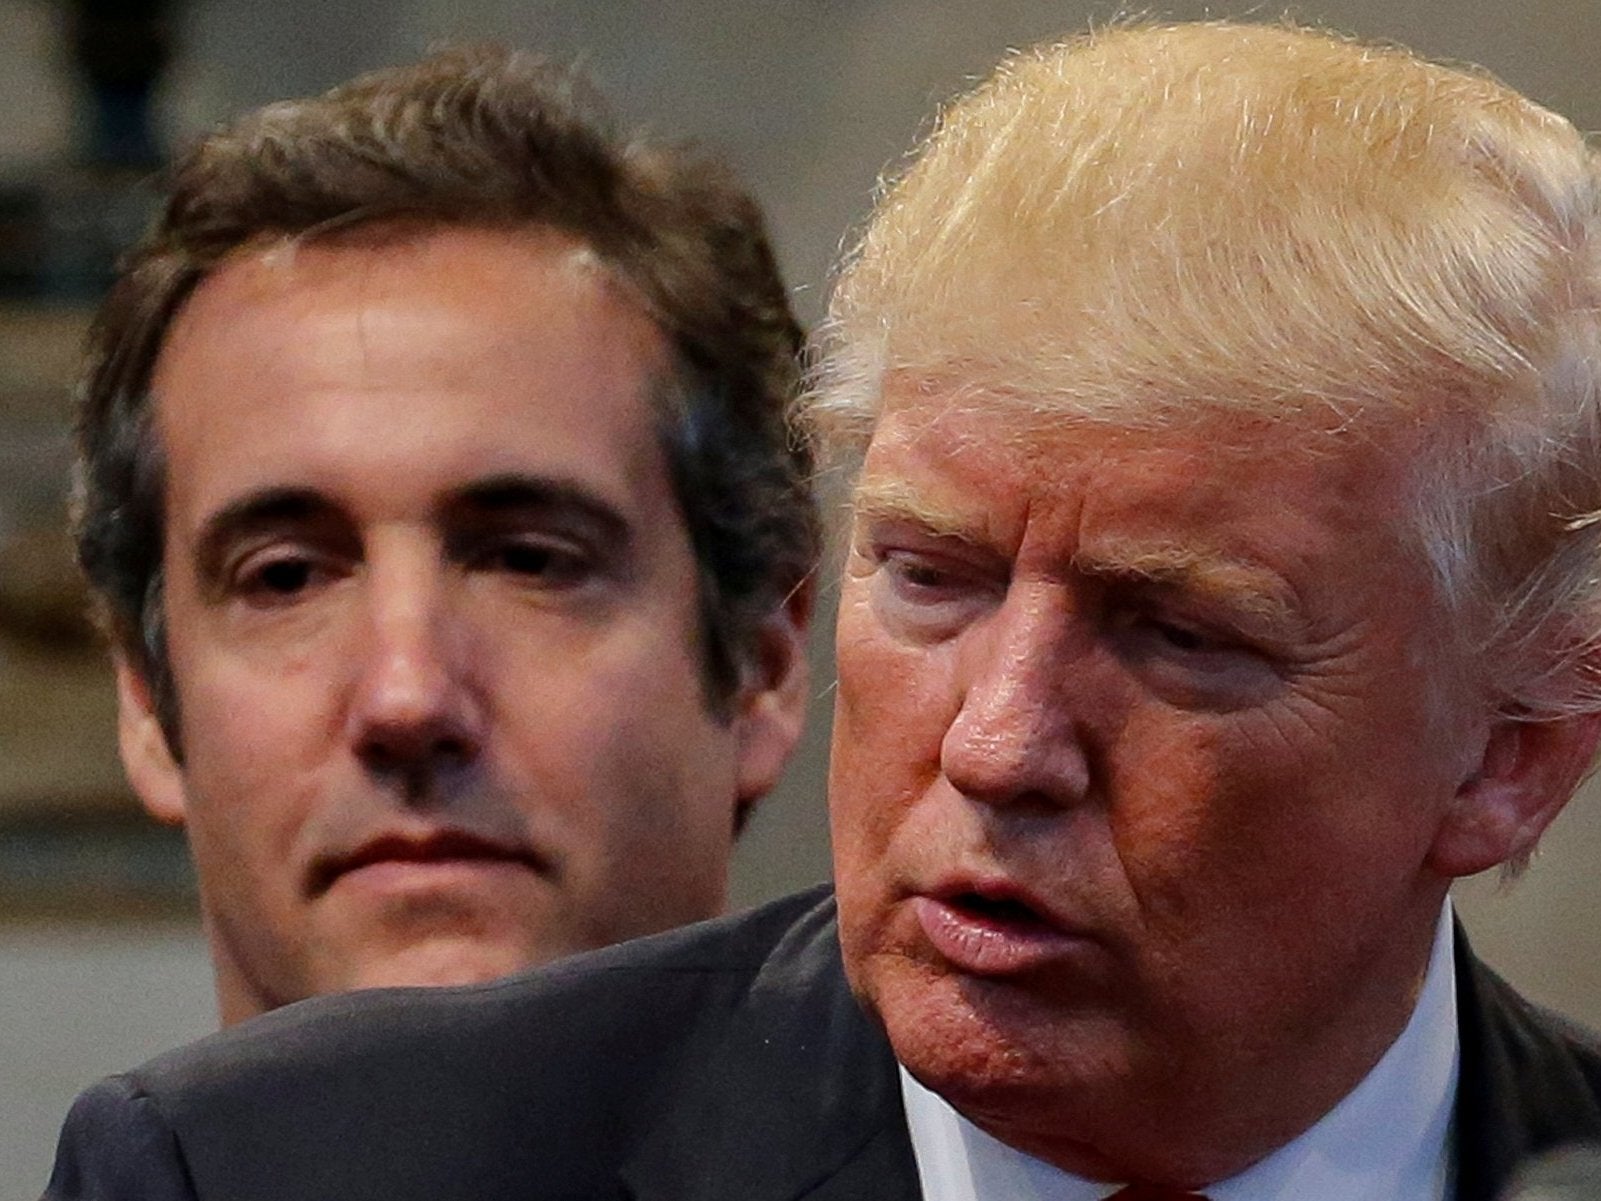 Mr Cohen and Mr Trump previously enjoyed a close working relationship